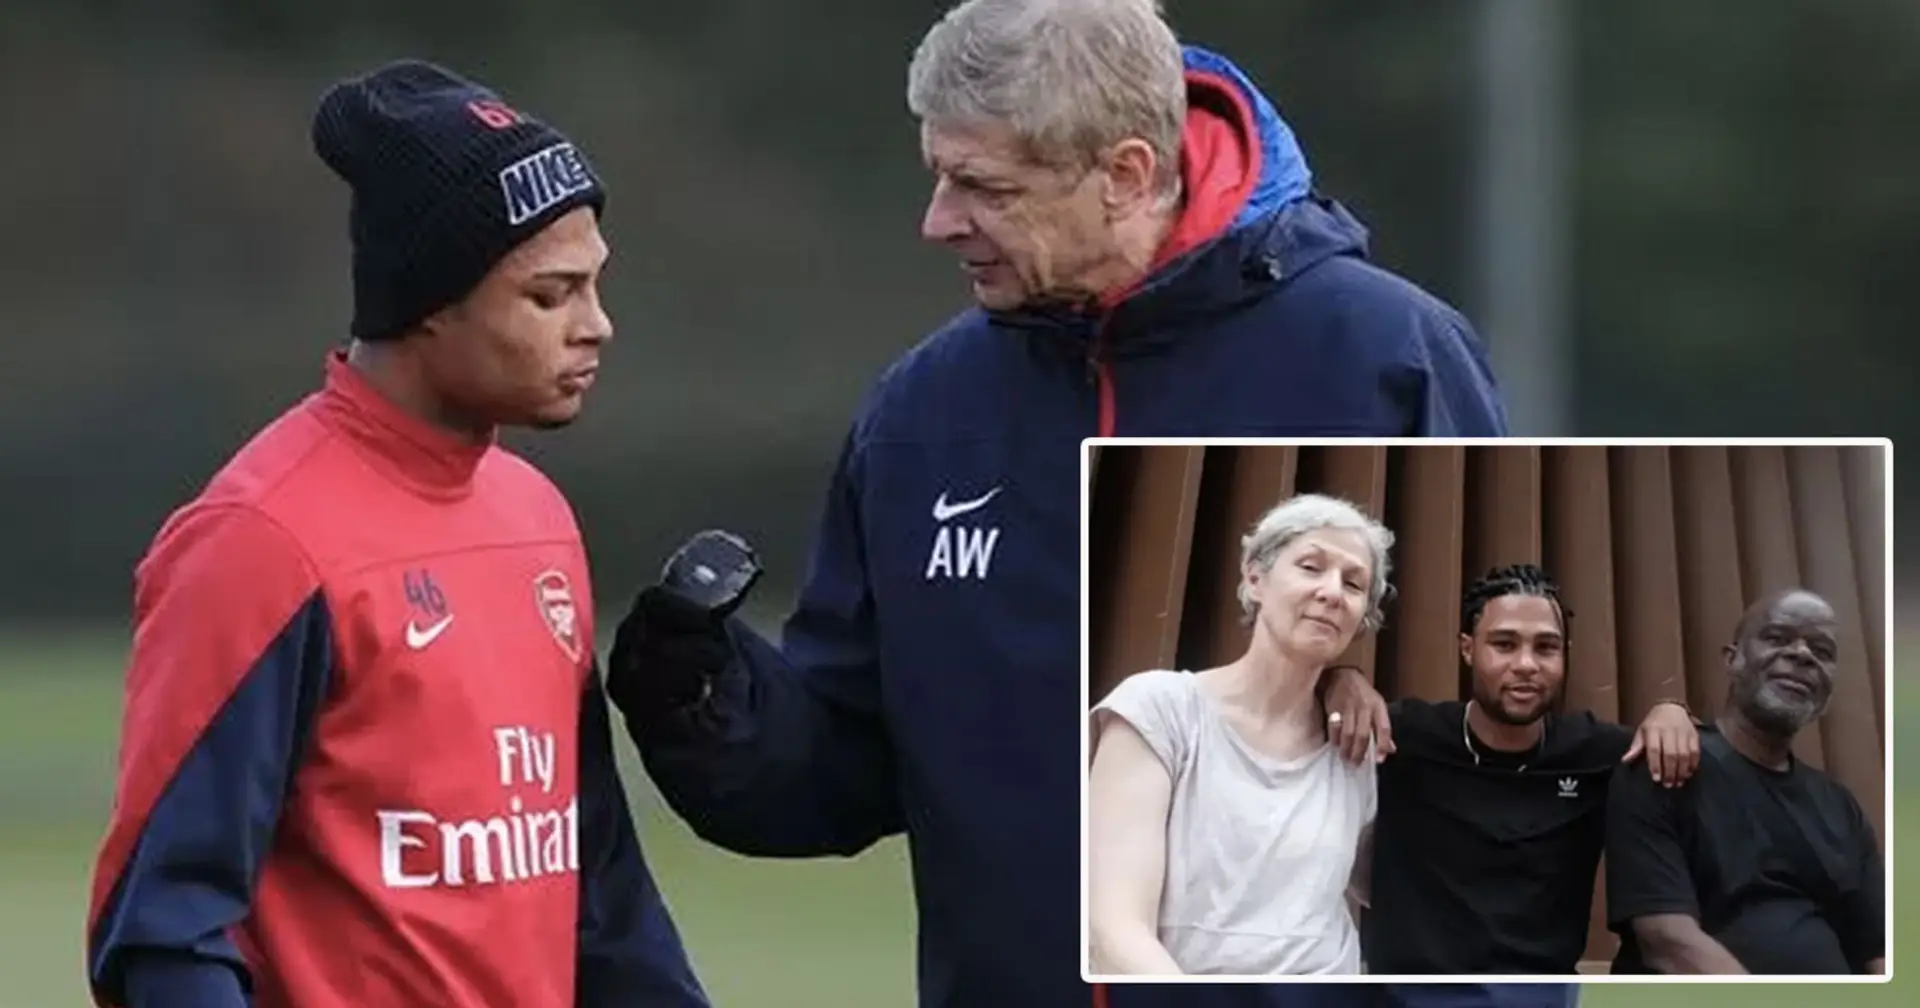 Serge Gnabry blames himself for failing at Arsenal - his parents warned him long before it happened